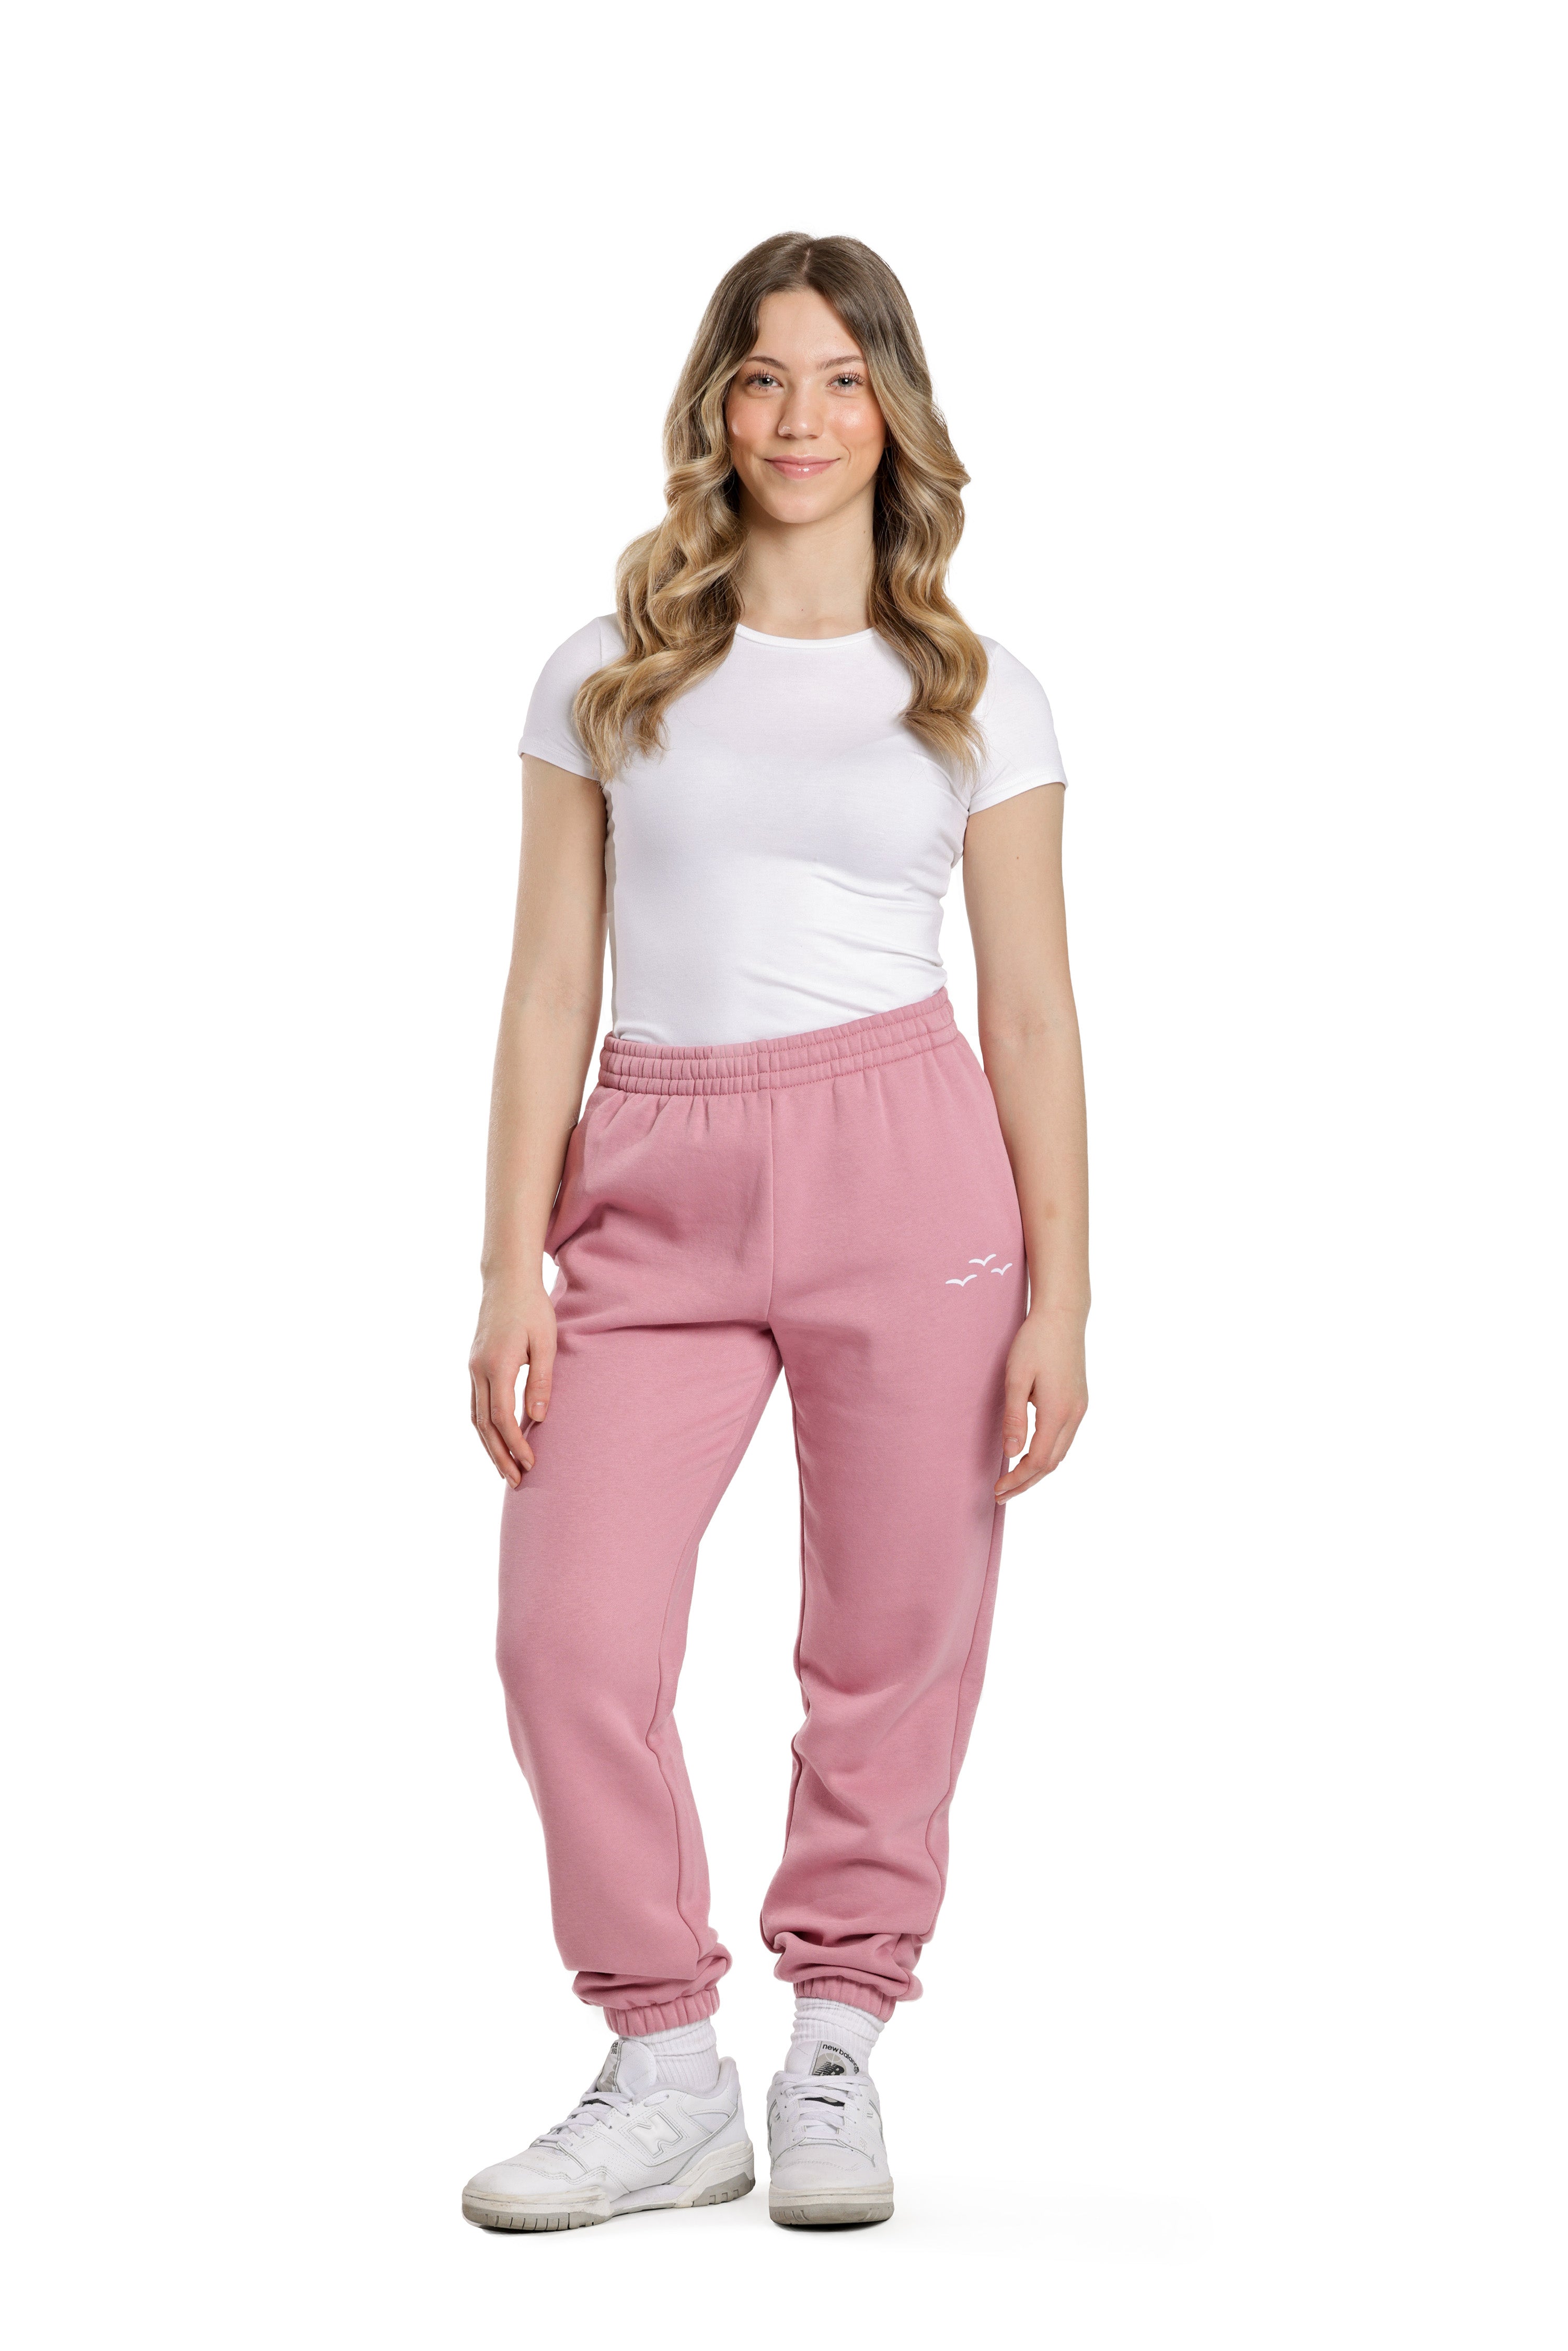 ToBeInStyle Women's Low Rise Sweatpants w/ Fold-Over Waistband 